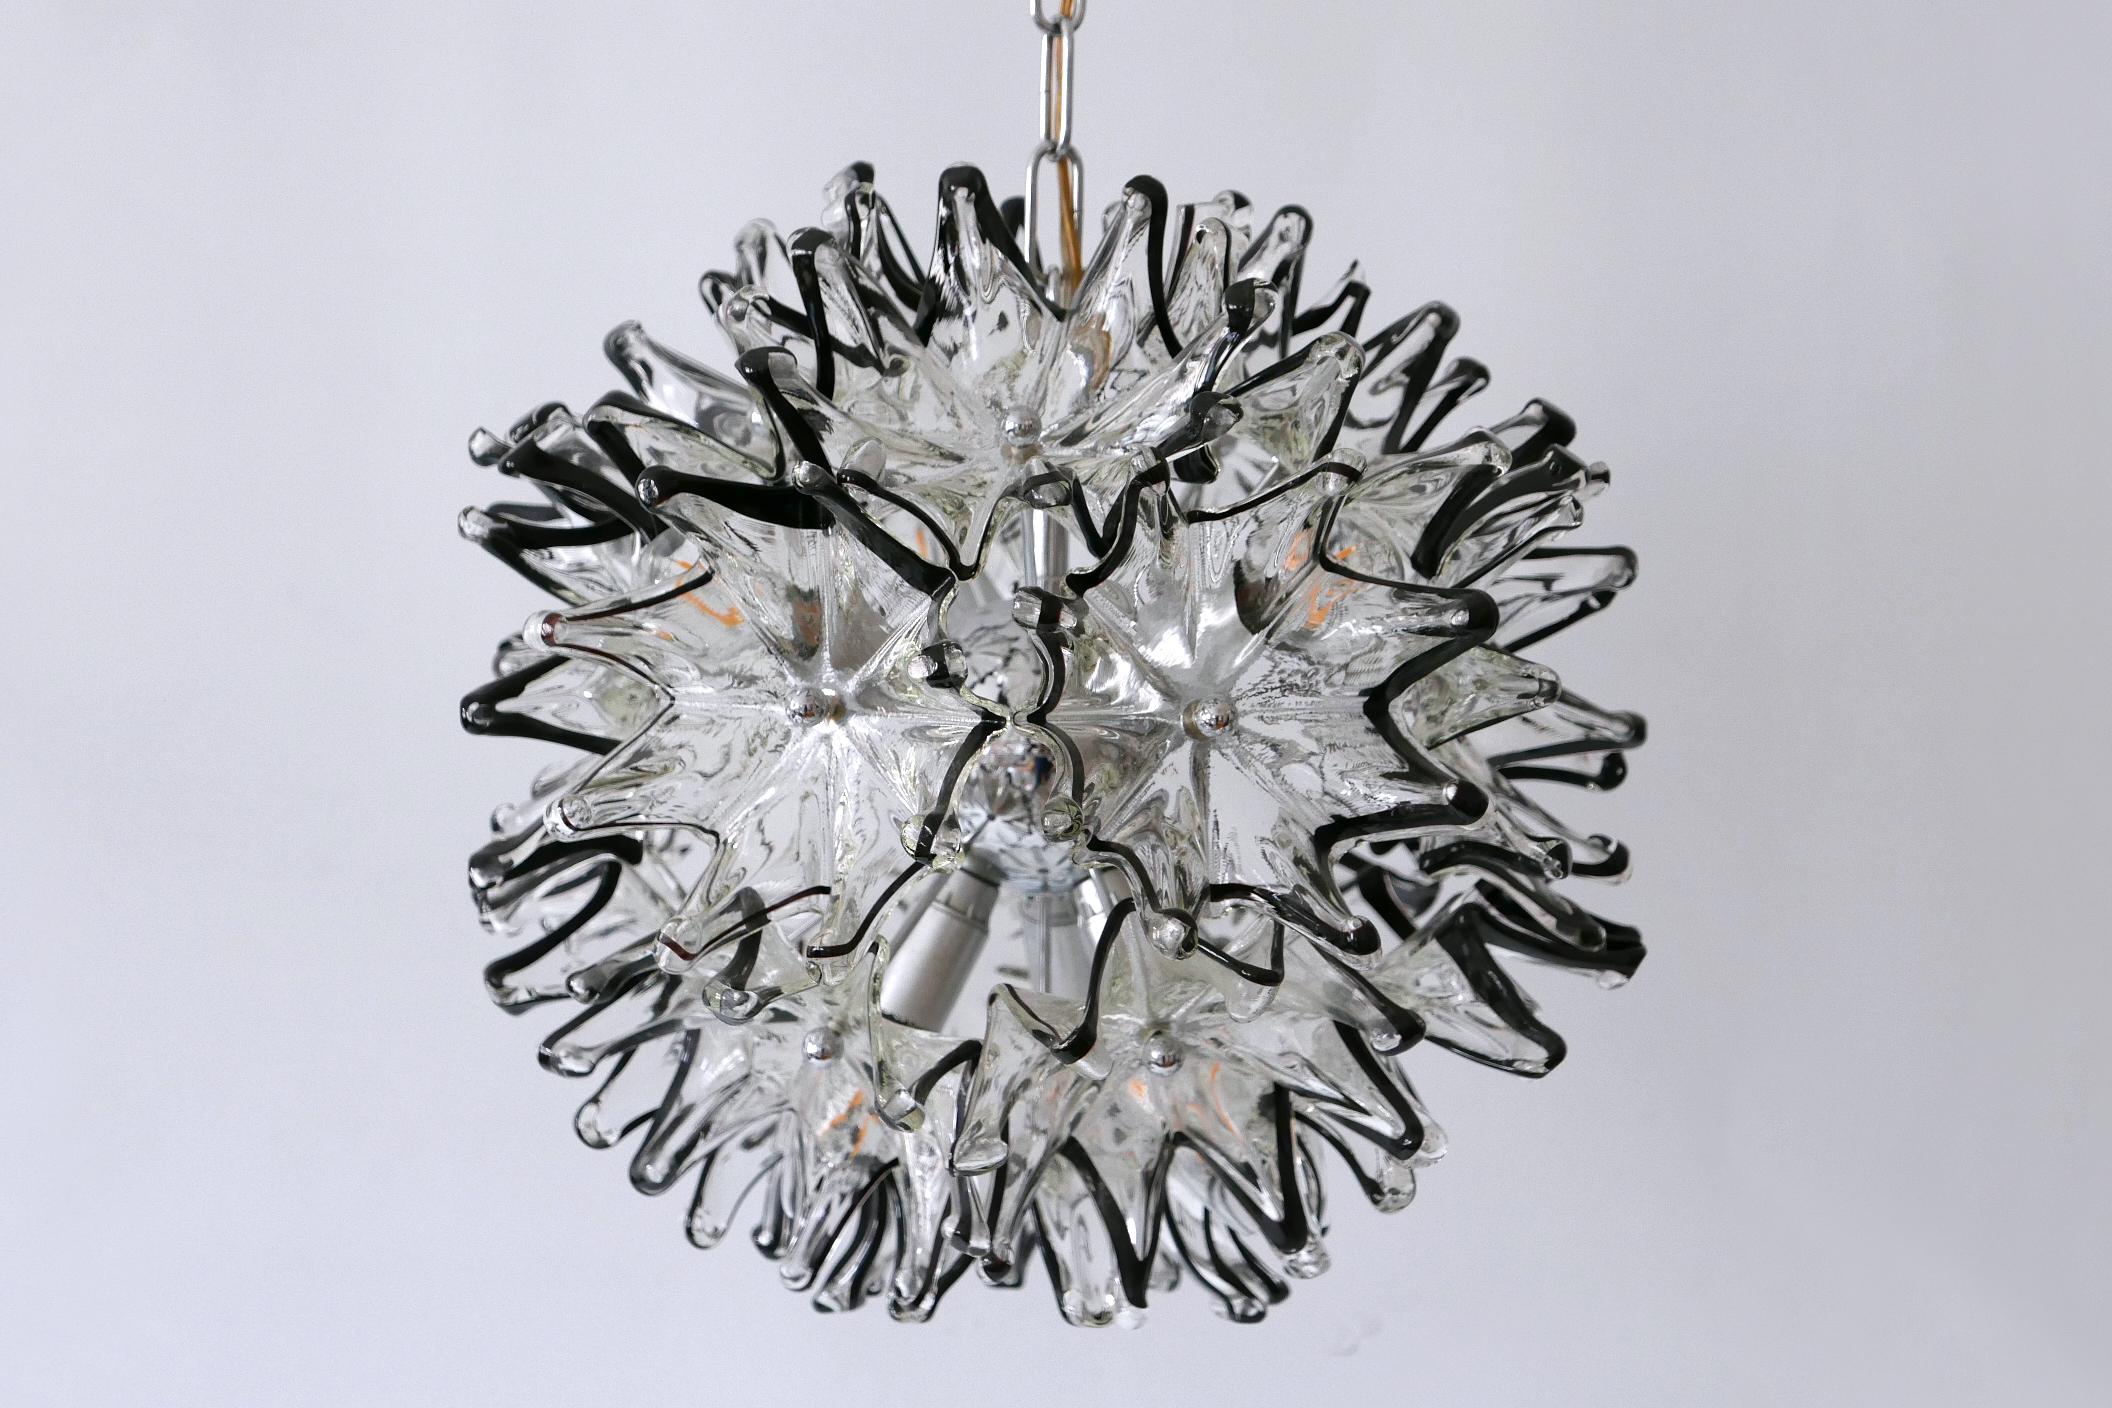 Mid-20th Century Mid-Century Modern 6-Flamed Chandelier or Pendant Lamp Dandelion 1960s Italy For Sale